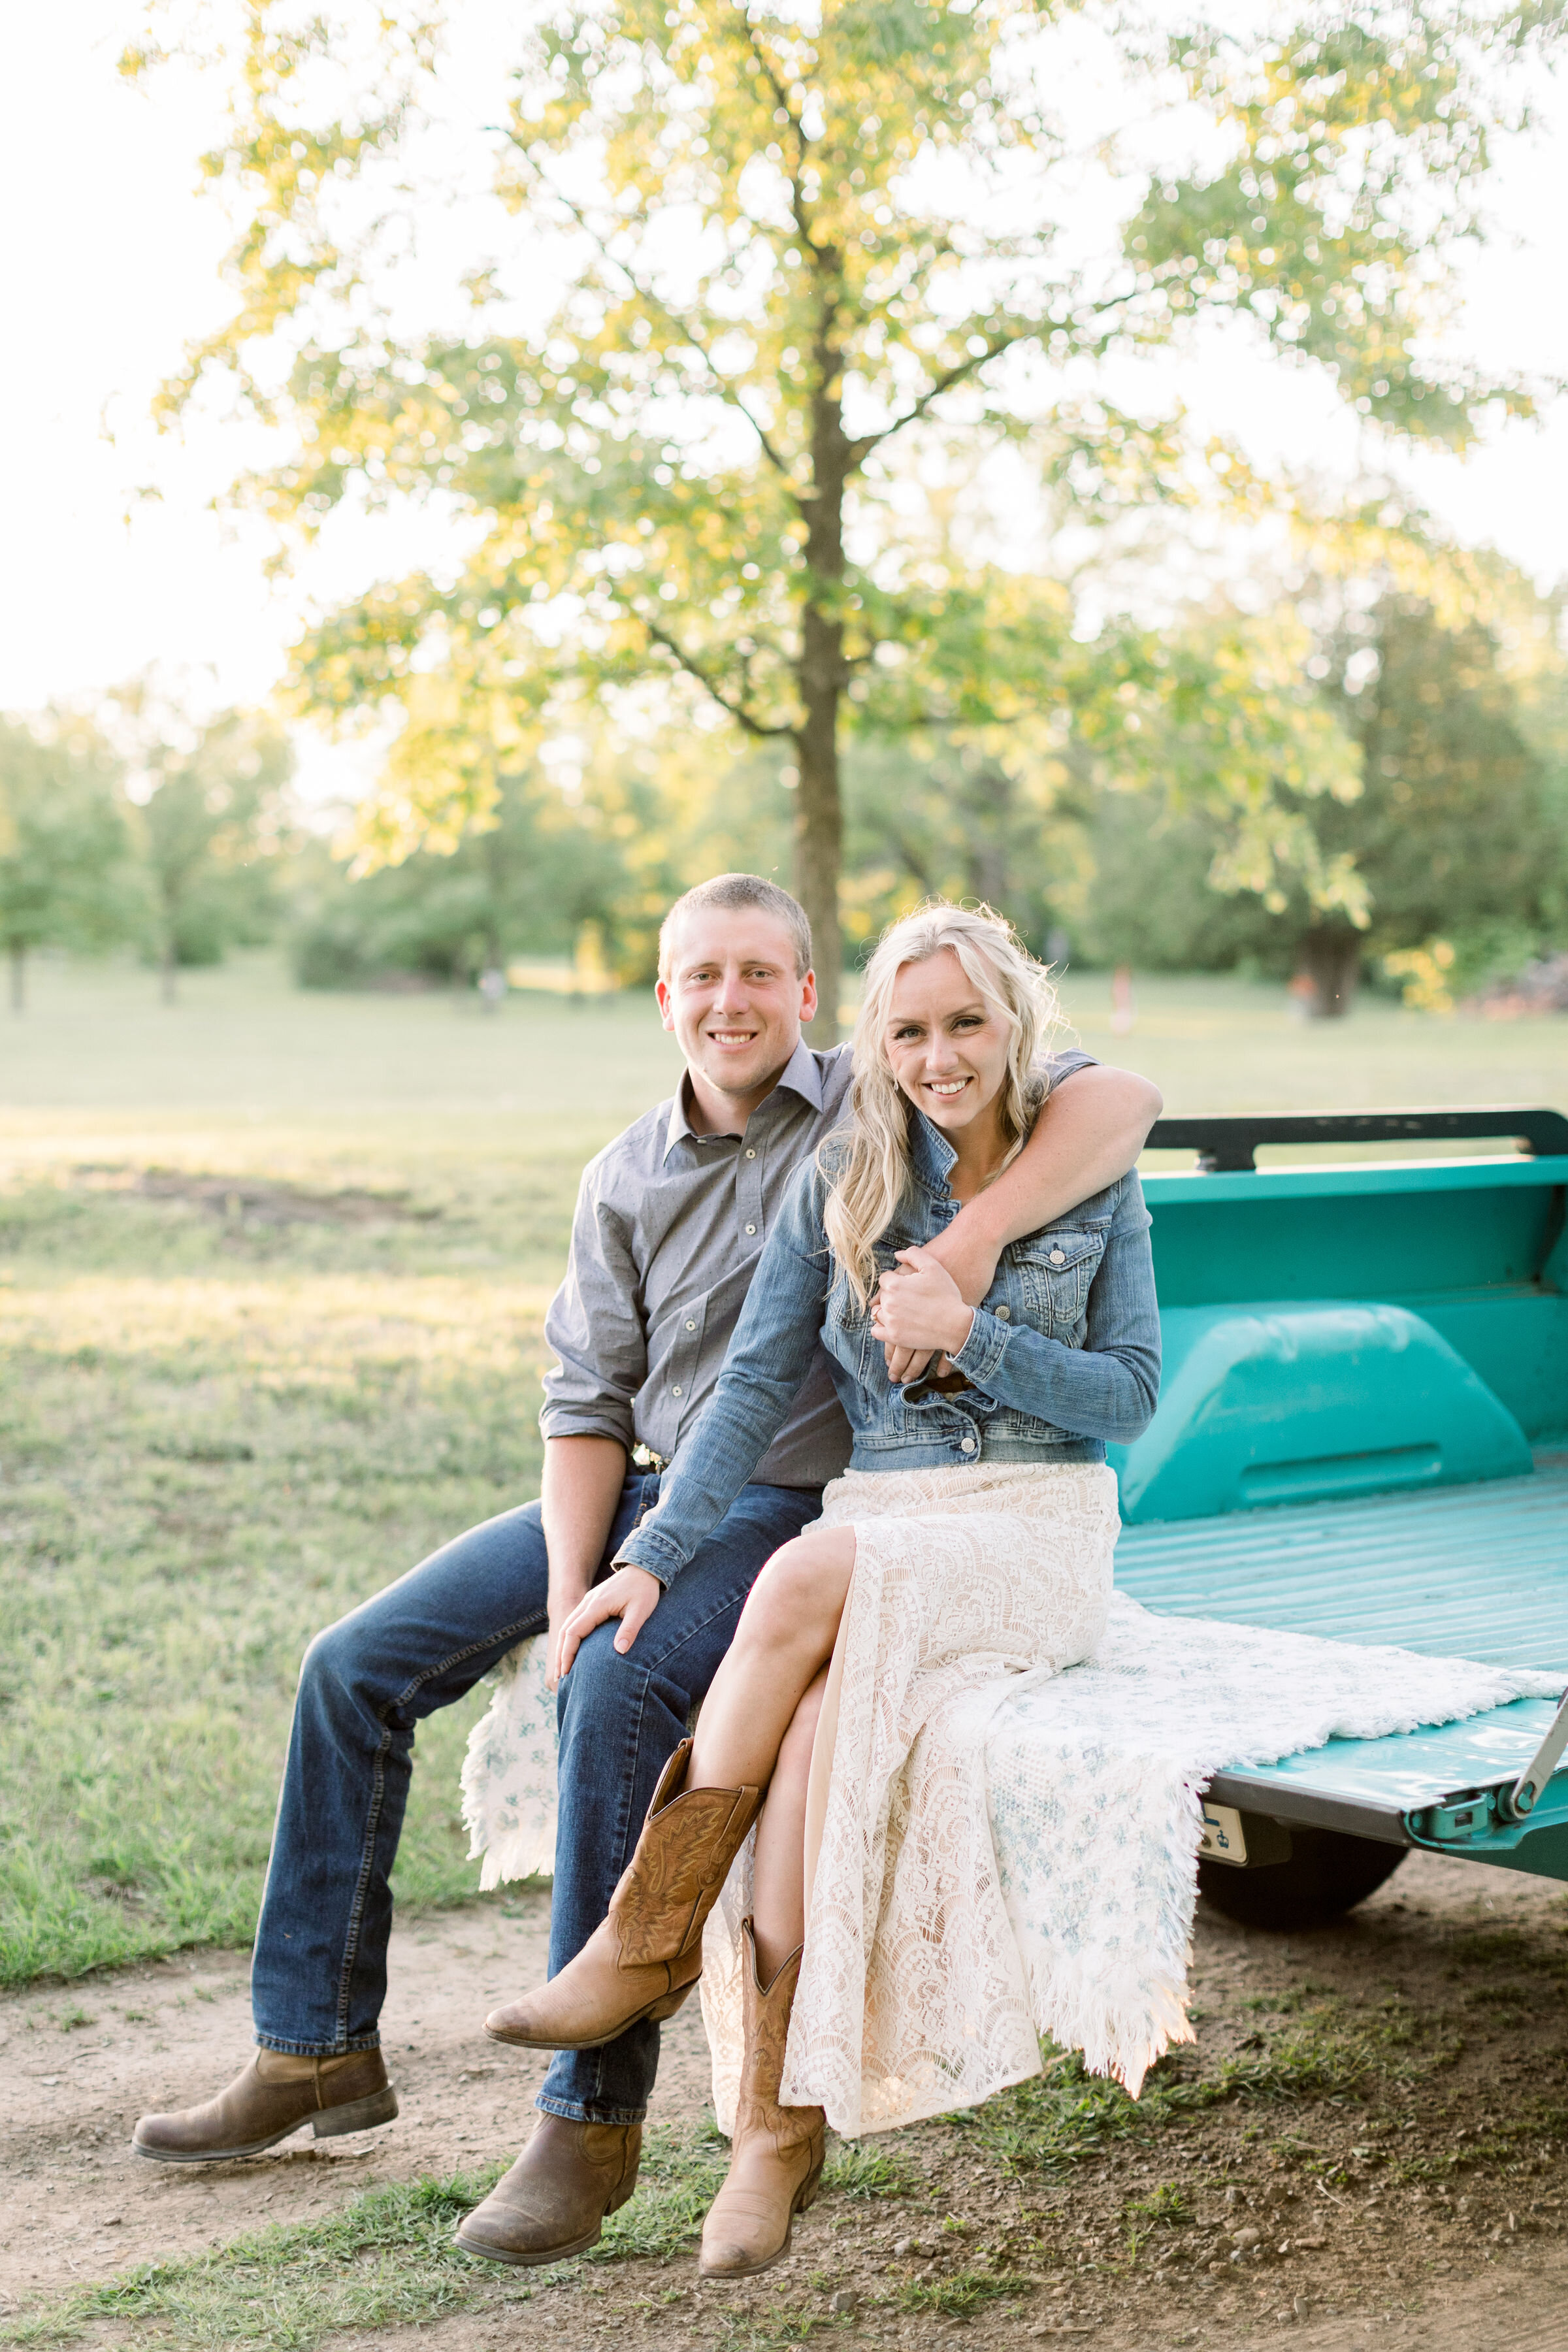  Ottawa, Canada photographer, Chelsea Mason photography captures this engaged couple sitting in the bed of this vintage Ford pickup truck during their engagement session. southern styled engagement outfit ford pickup truck #ChelseaMasonPhotography #O